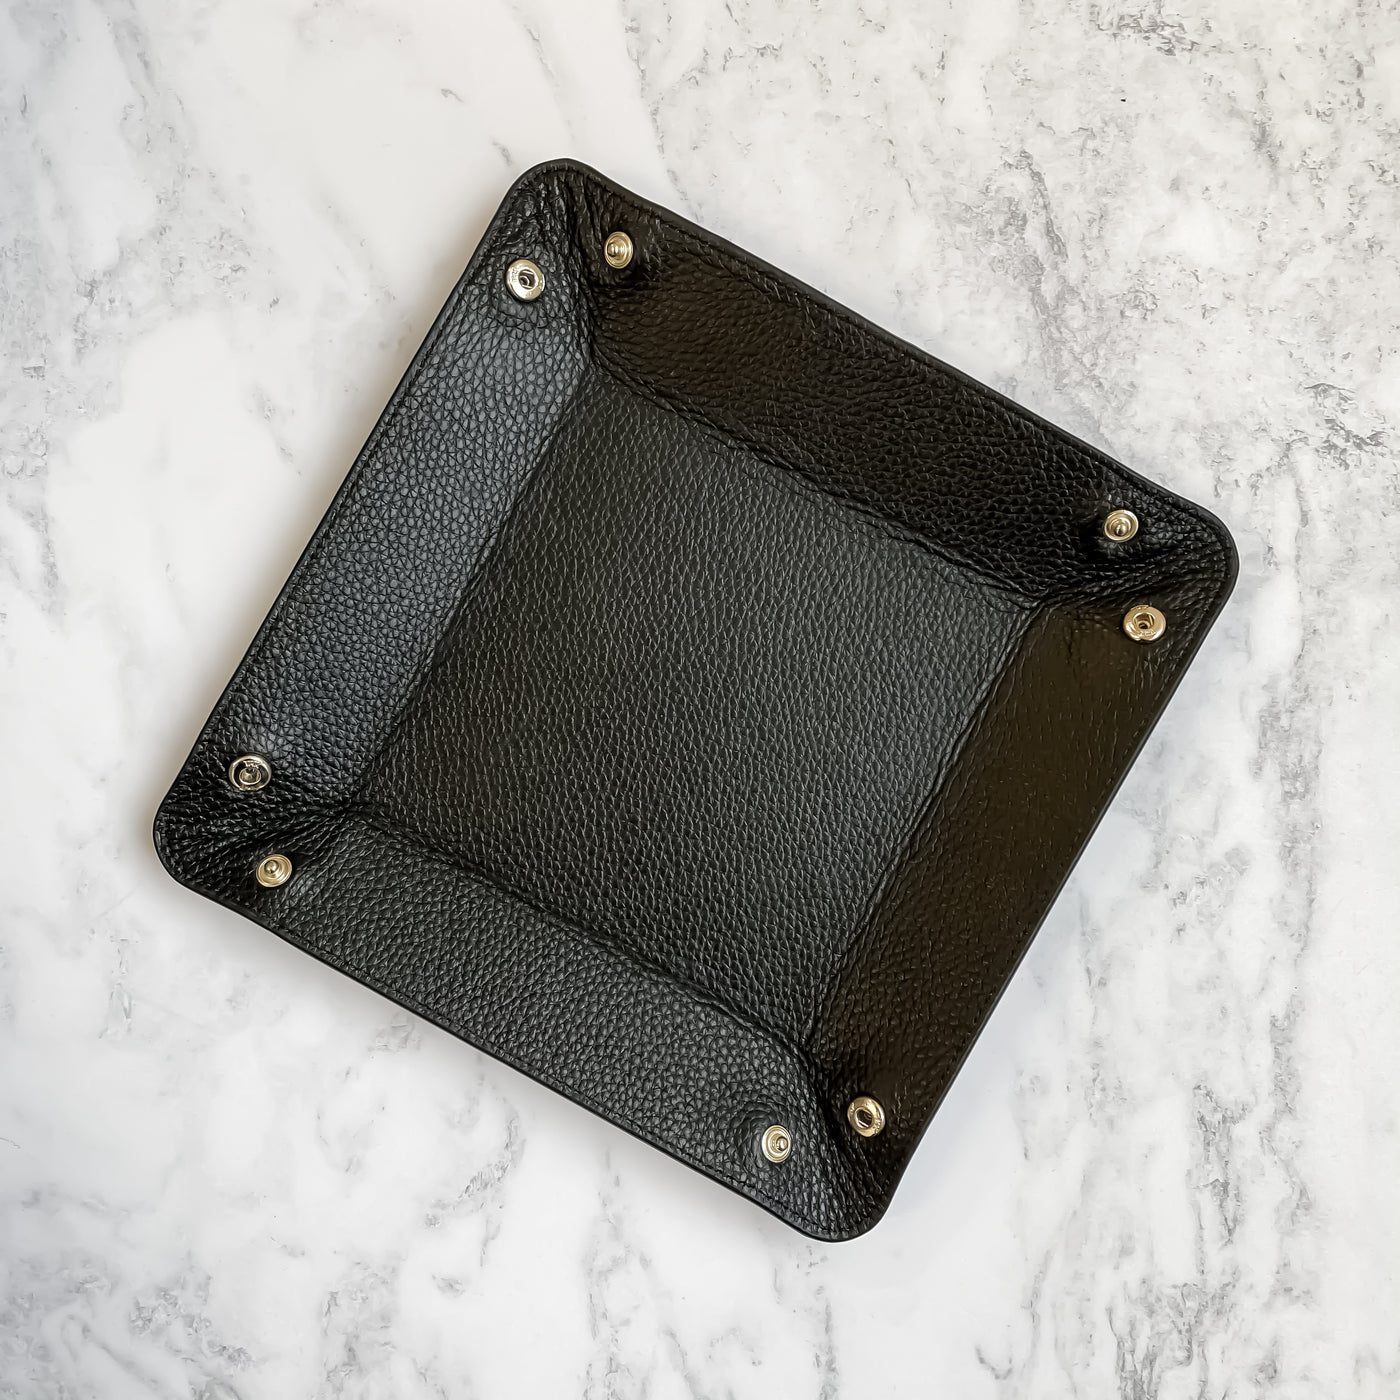 Open valet tray on a marble background